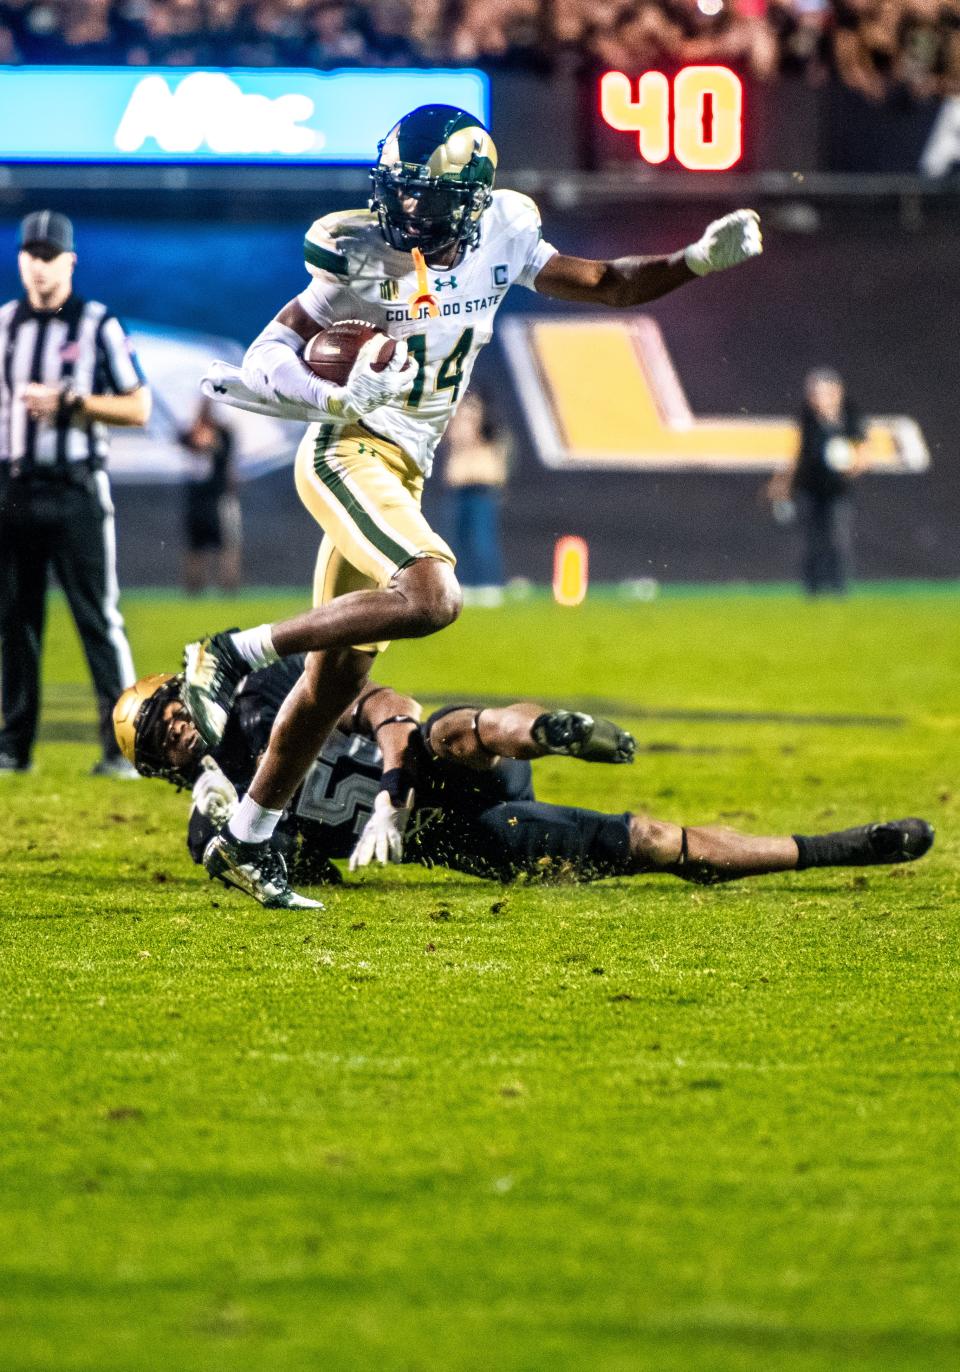 CSU football's senior wide receiver Tory Horton (14) side steps a defender against CU's Shilo Sanders in the Rocky Mountain Showdown on Sept. 16, 2023 at Folsom Field in Boulder, Colo.